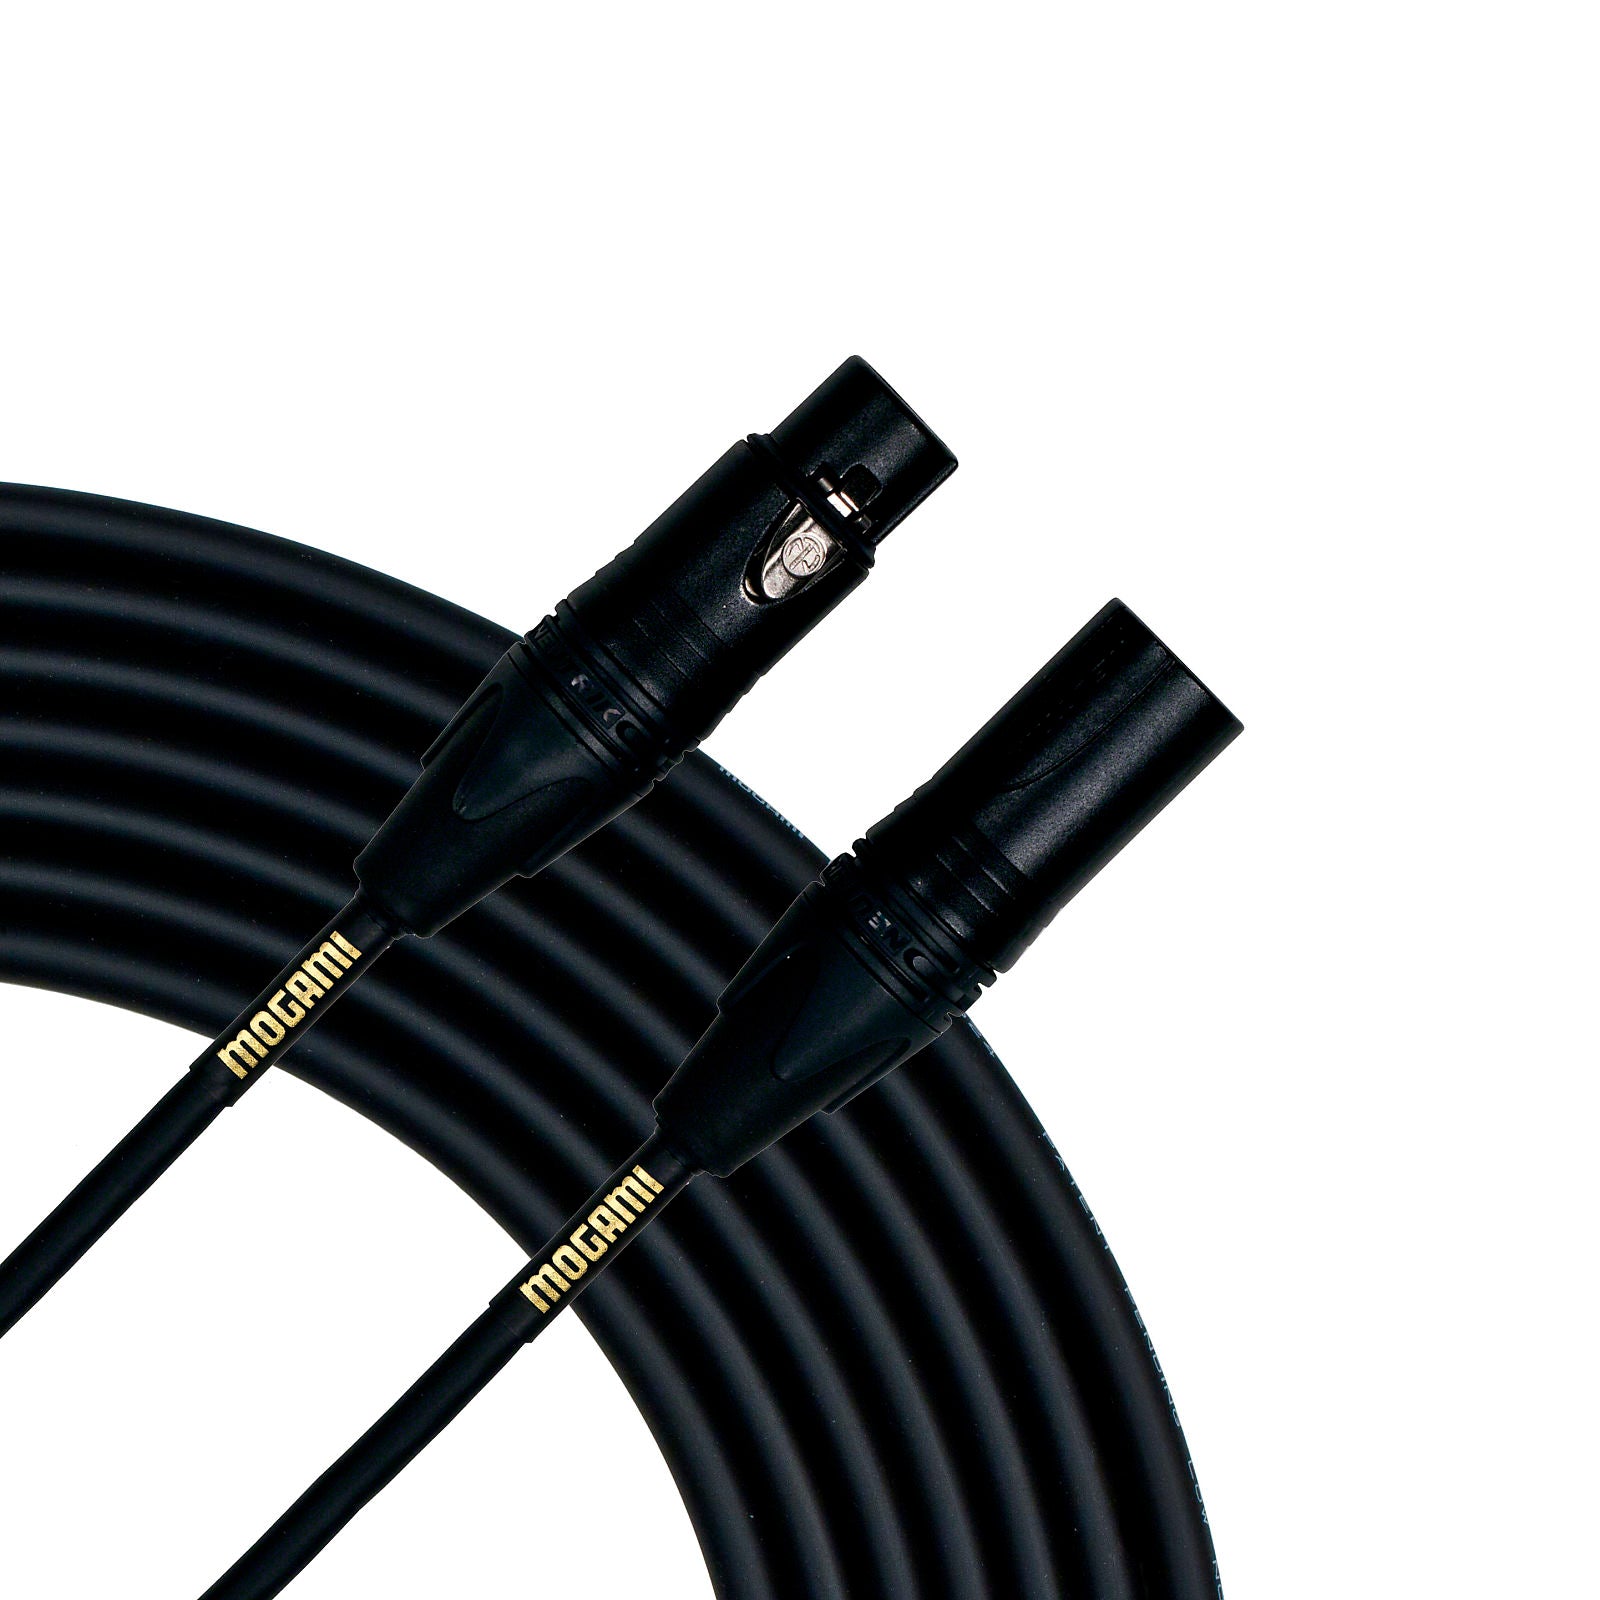 Mogami Gold Studio Microphone Cable, 50 Foot